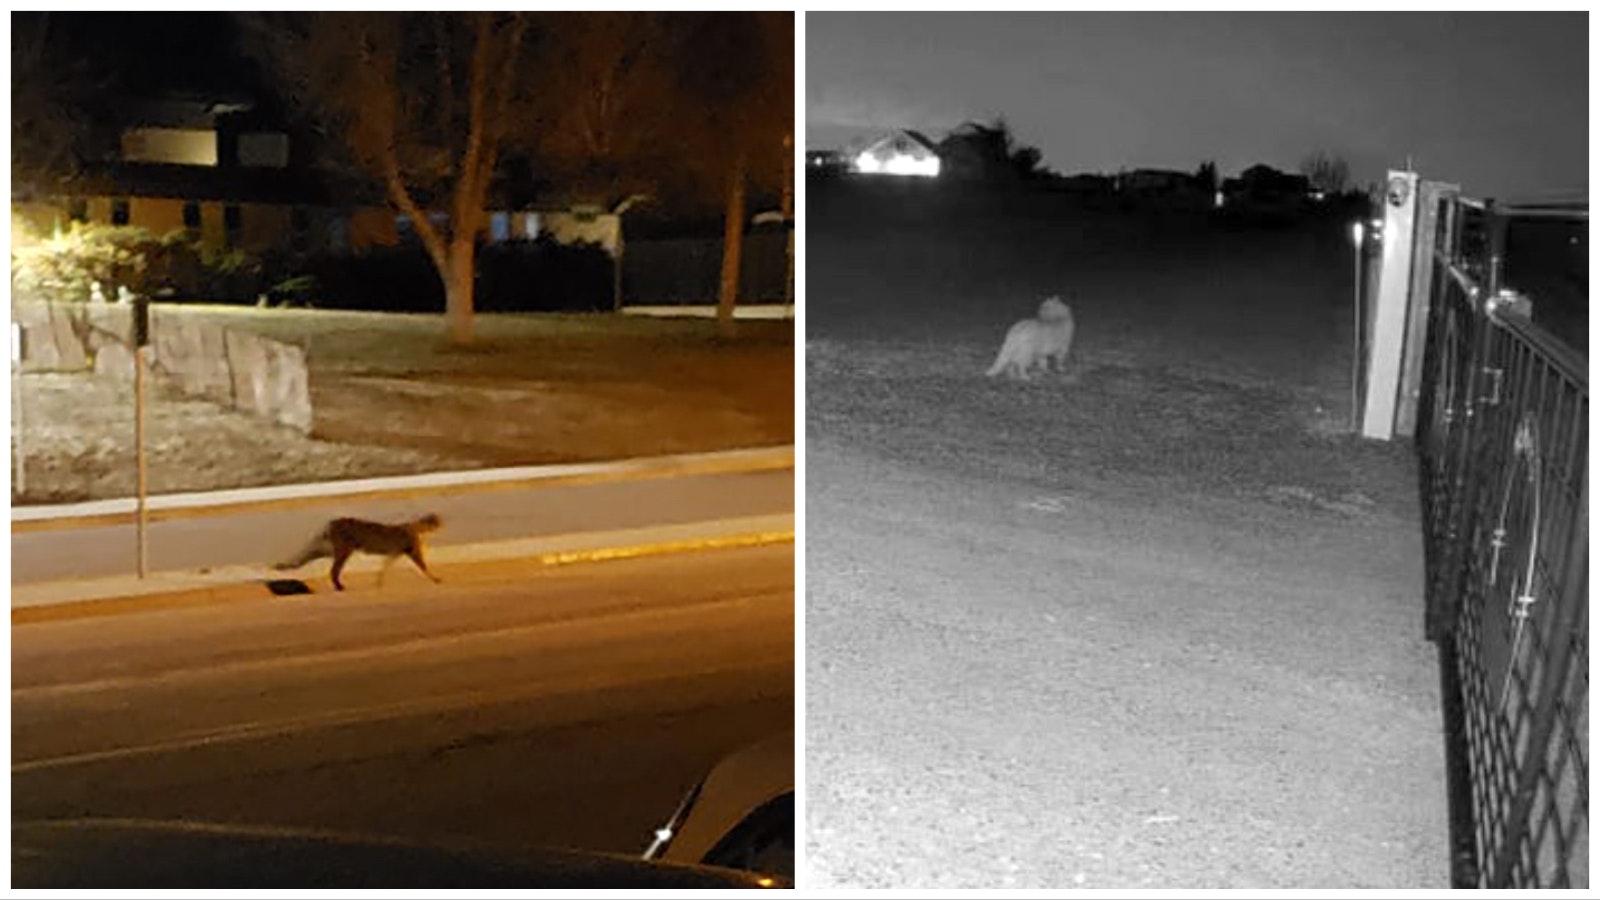 Casper resident Cynthia Leverich caught a mountain lion prowling around town Thursday morning, left, while Cheyenne resident Kenton Paton got surveillance photos March 27 of what looks like a lion, right.